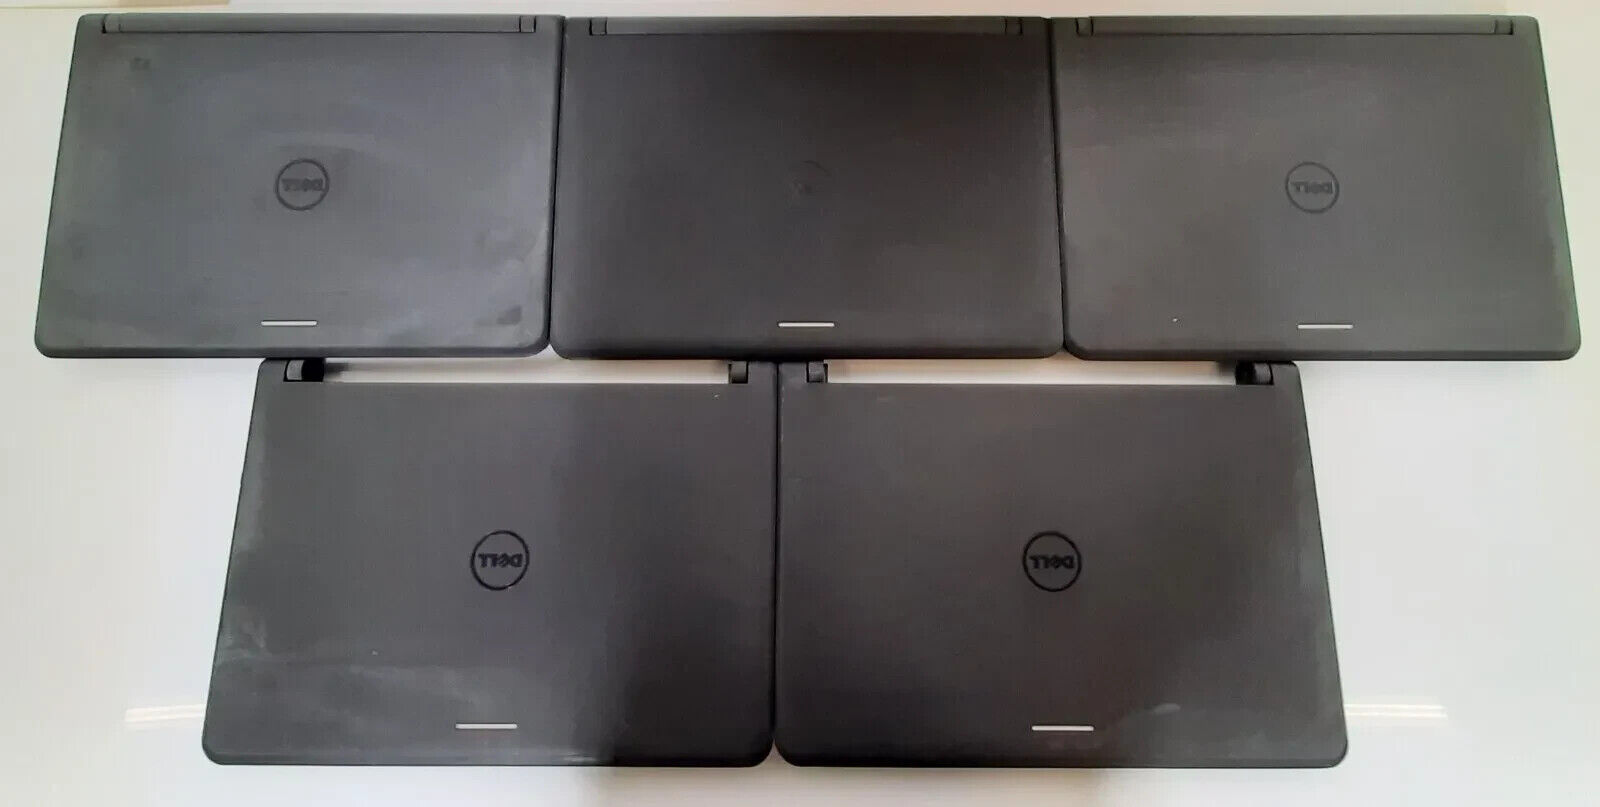 Dell Latitude 3340 Laptop 1.7 GHz 80GB SSD 4GB RAMz-(NON-FUNCTIONAL)- LOT OF 20